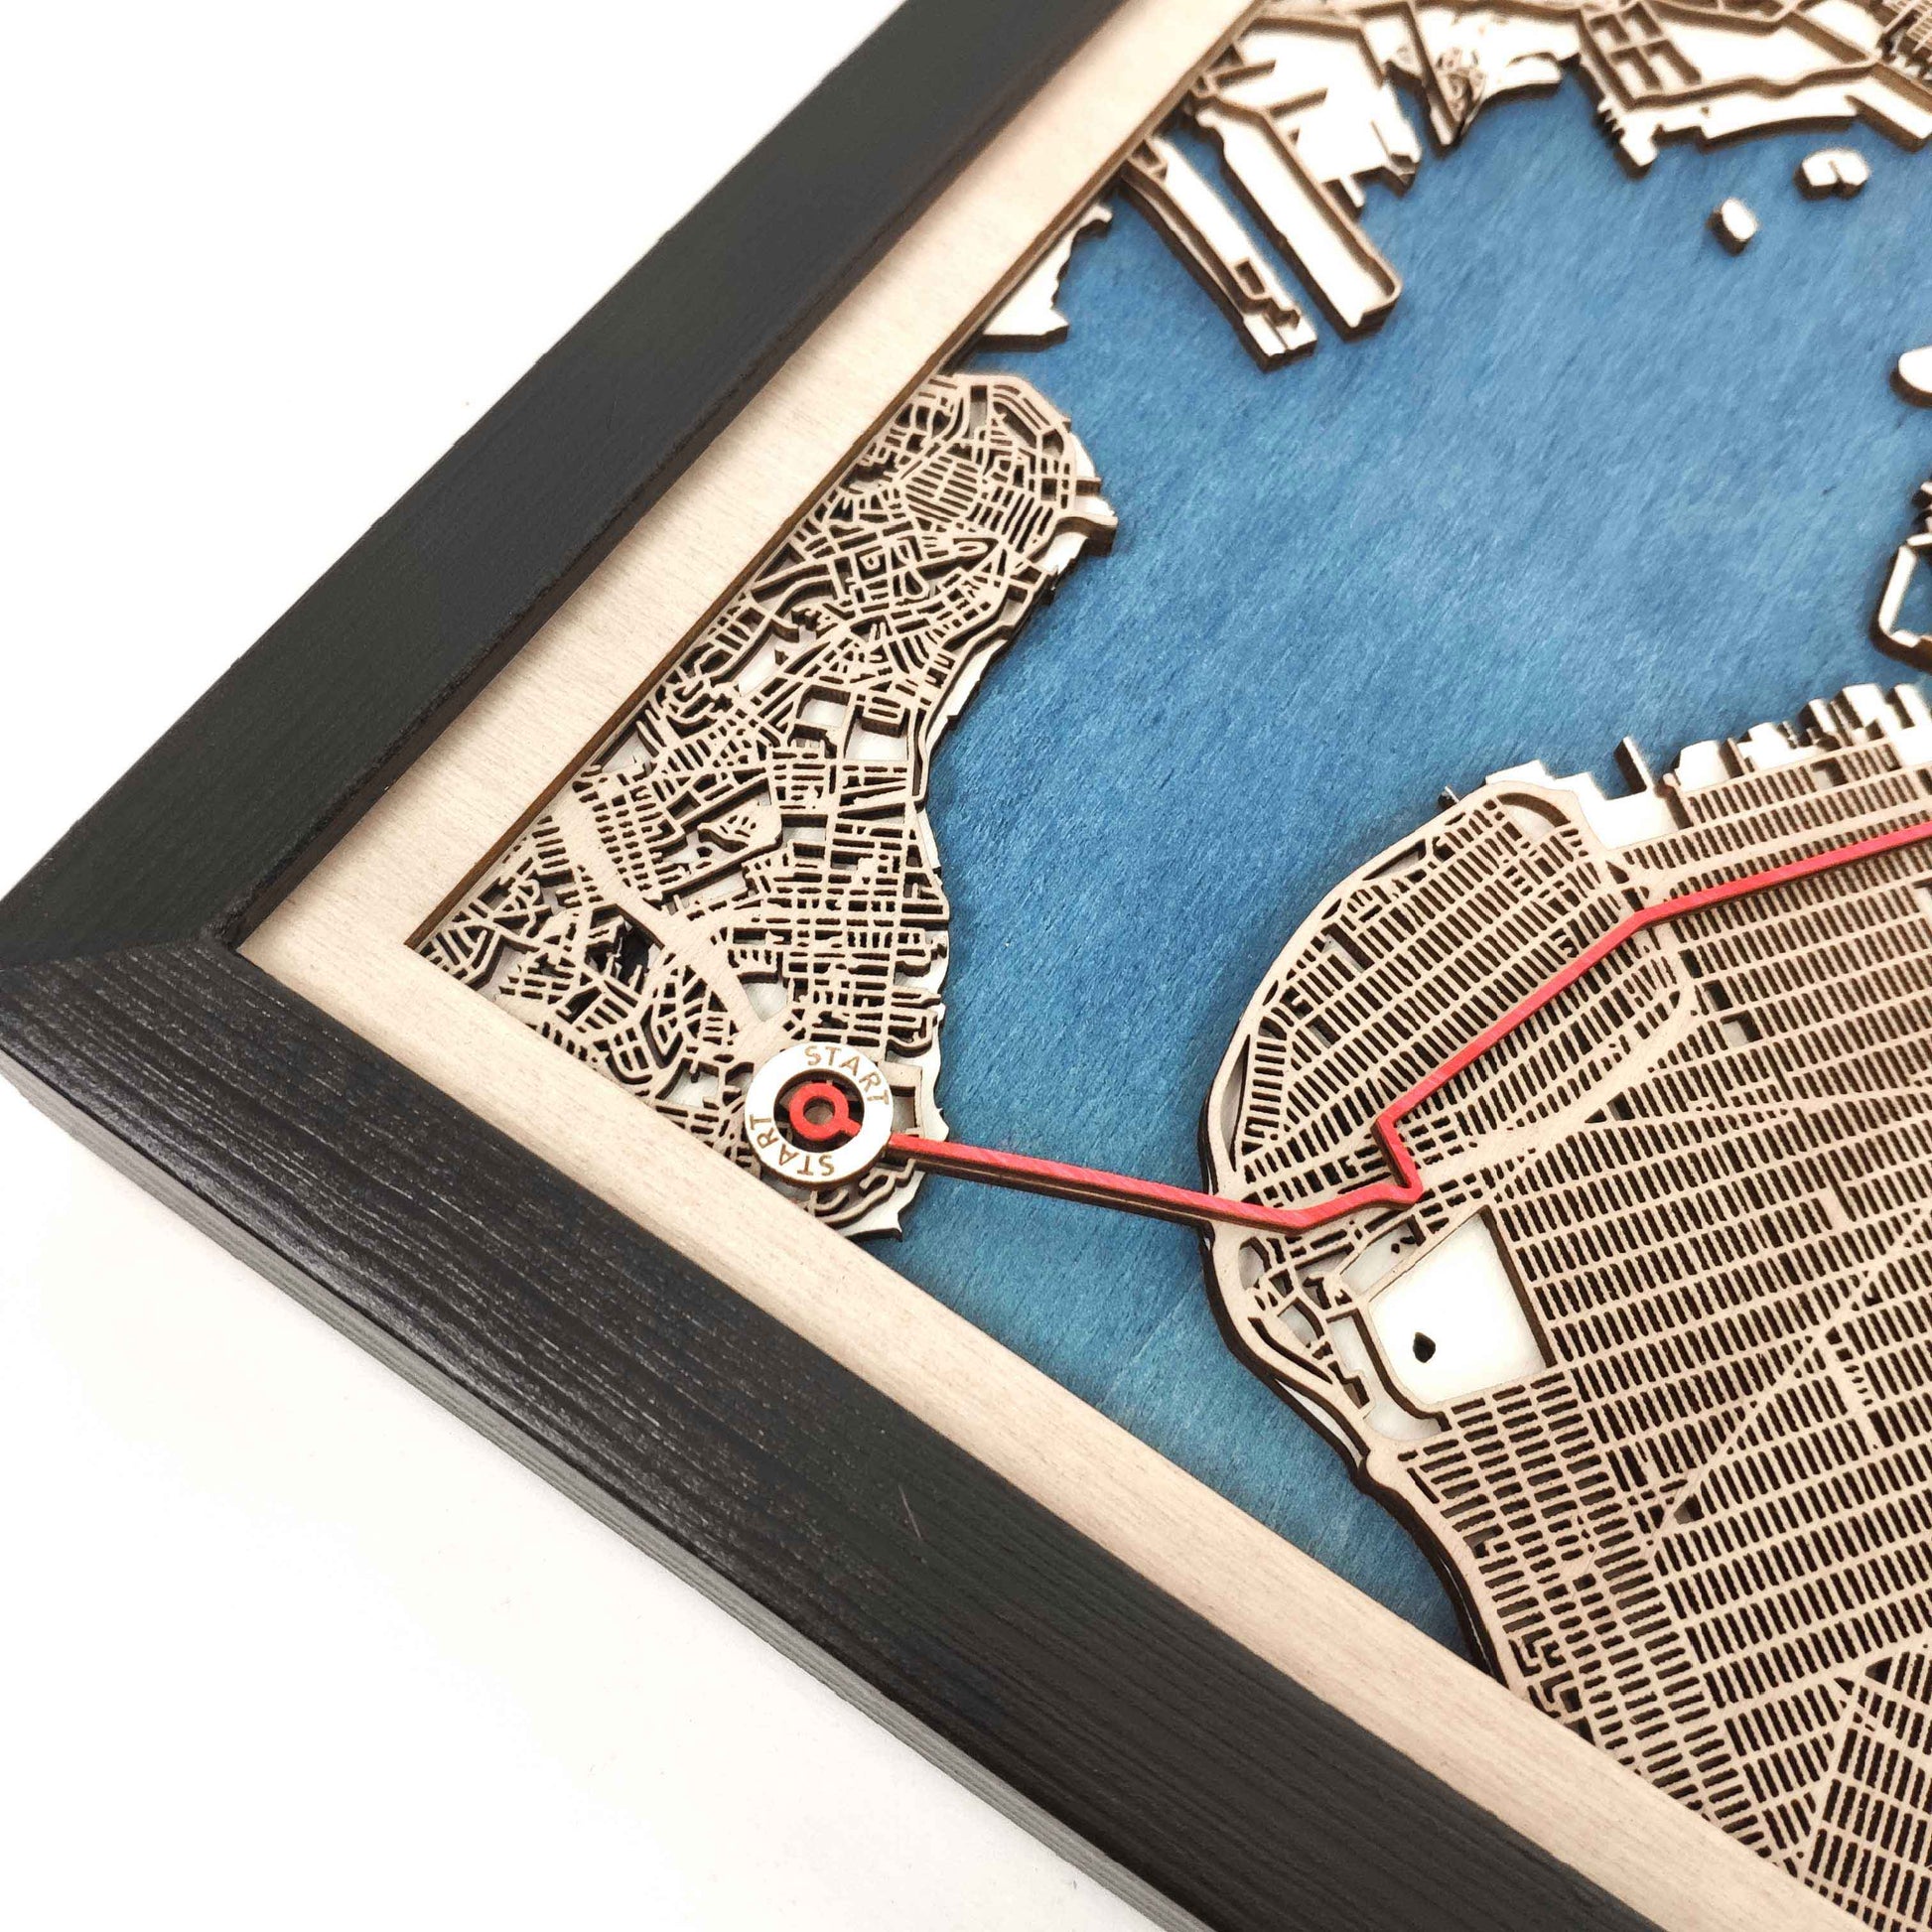 New York City Marathon Wooden Map by CityWood - Custom Wood Map Art - Unique Laser Cut Engraved - Anniversary Gift